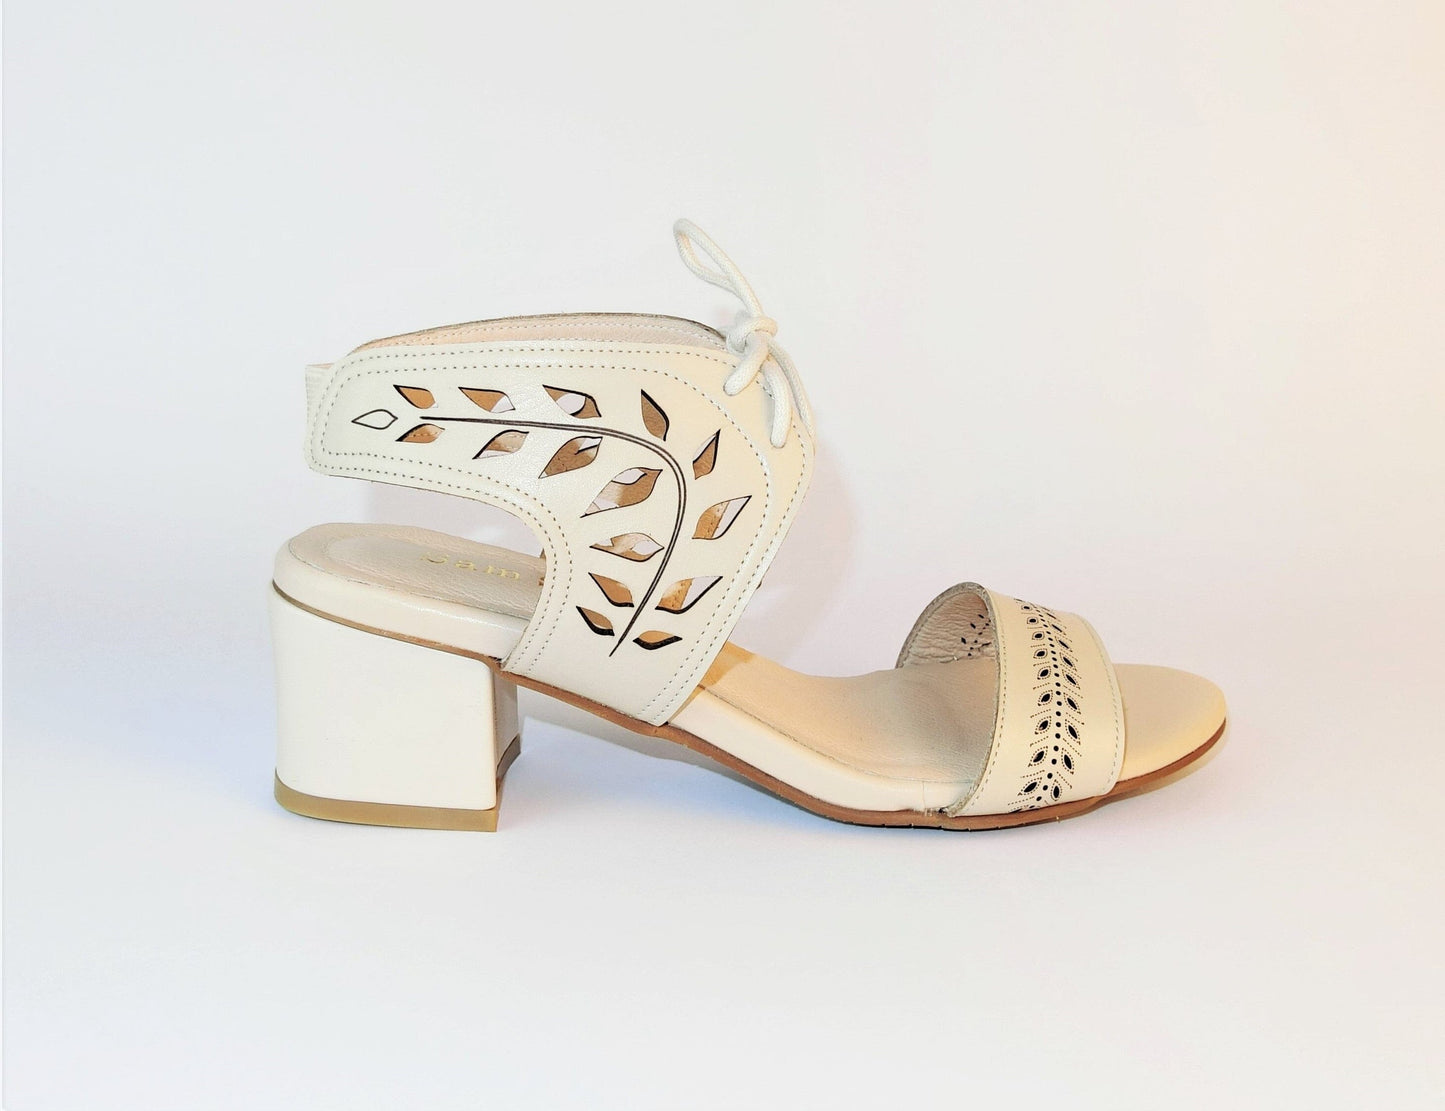 SS21002 Leather laser cut block heel sandals in Tan and Beige sandals Sam Star Shoes Beige 36 (3) 